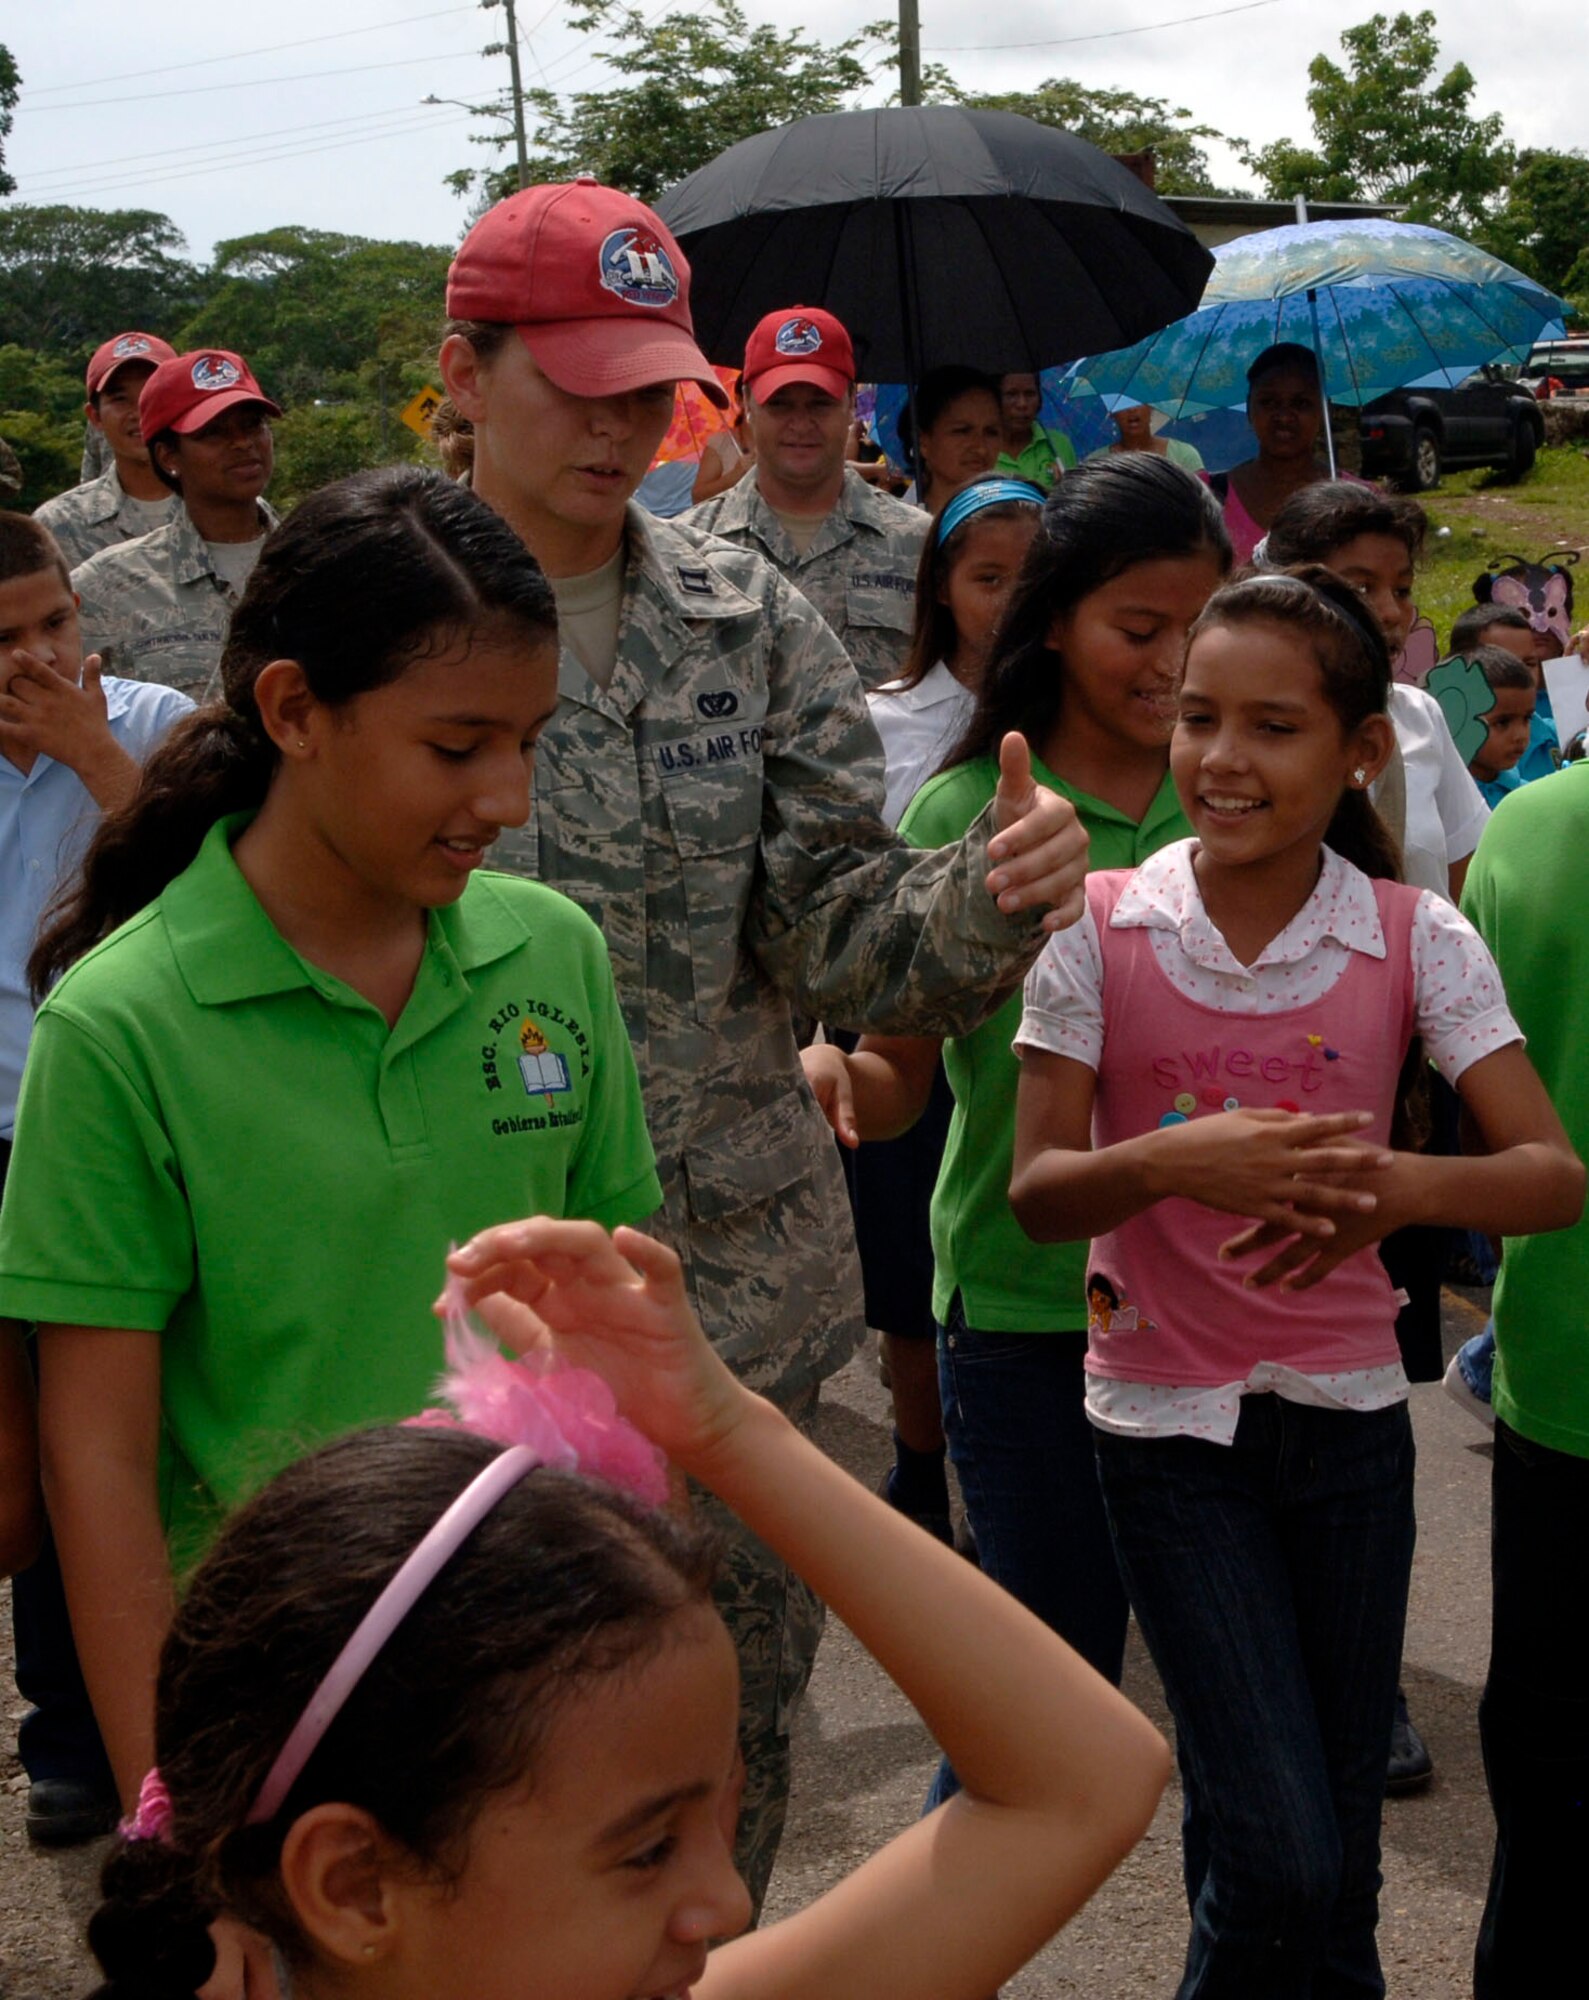 Capt.Brandy Caffee, 820th Expeditionary RED HORSE Squadron, speaks with children while marching in a parade of students, parents and U.S. service members in front of the Rio Iglesia elementary school June 24. Personnel from New Horizons Panama 2010 took time out of the construction schedule to support the school's conservation day festival. (U.S. Air Force photo/Tech. Sgt. Eric Petosky)